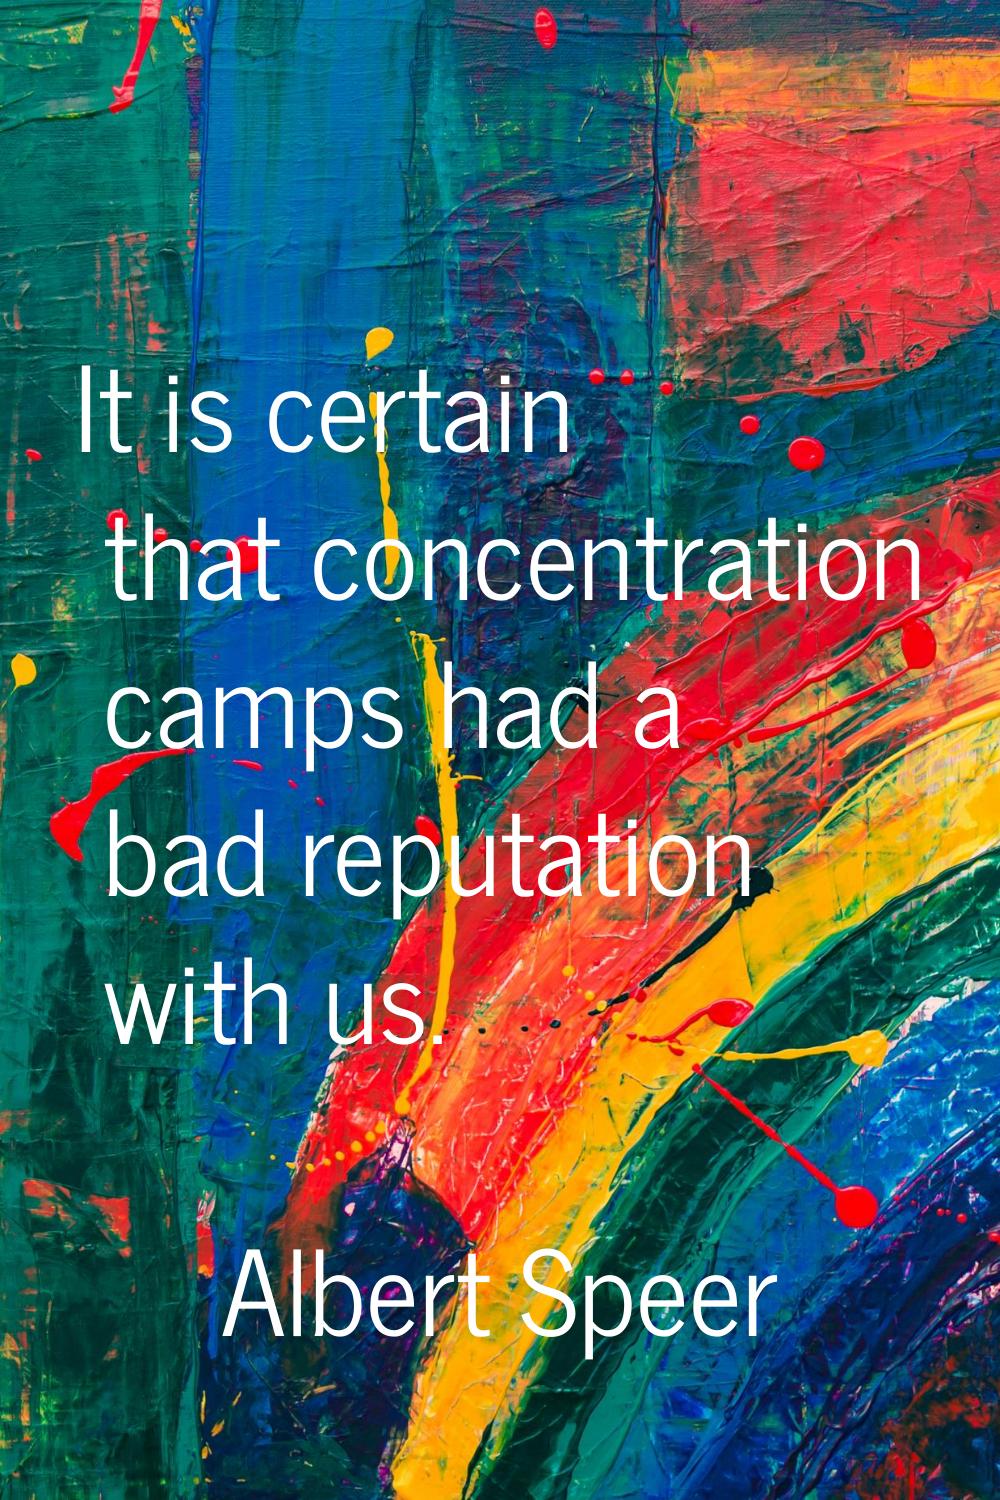 It is certain that concentration camps had a bad reputation with us.